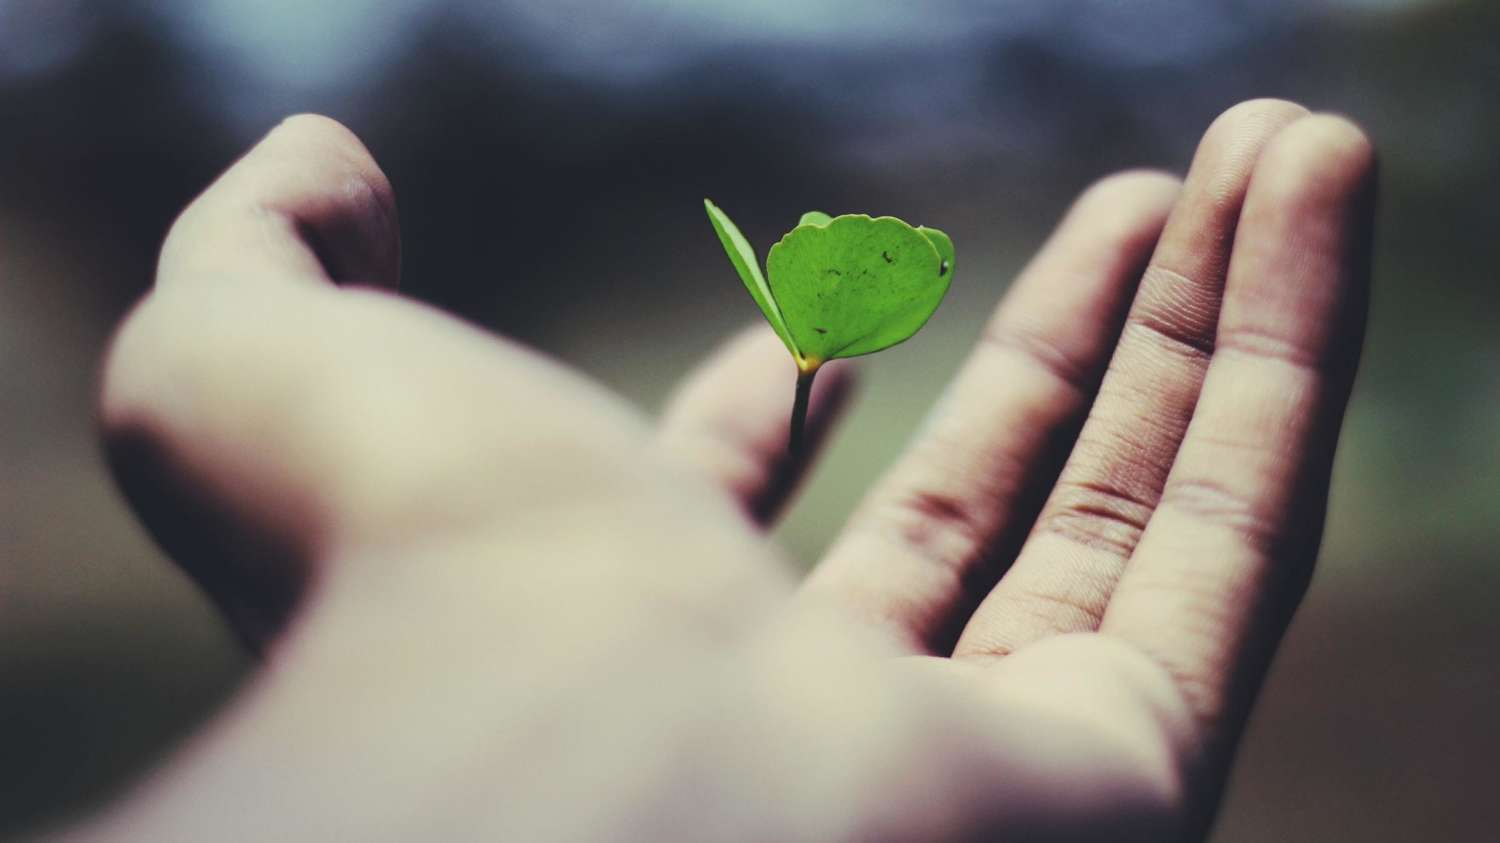 Image of a hand holding a small green shoot